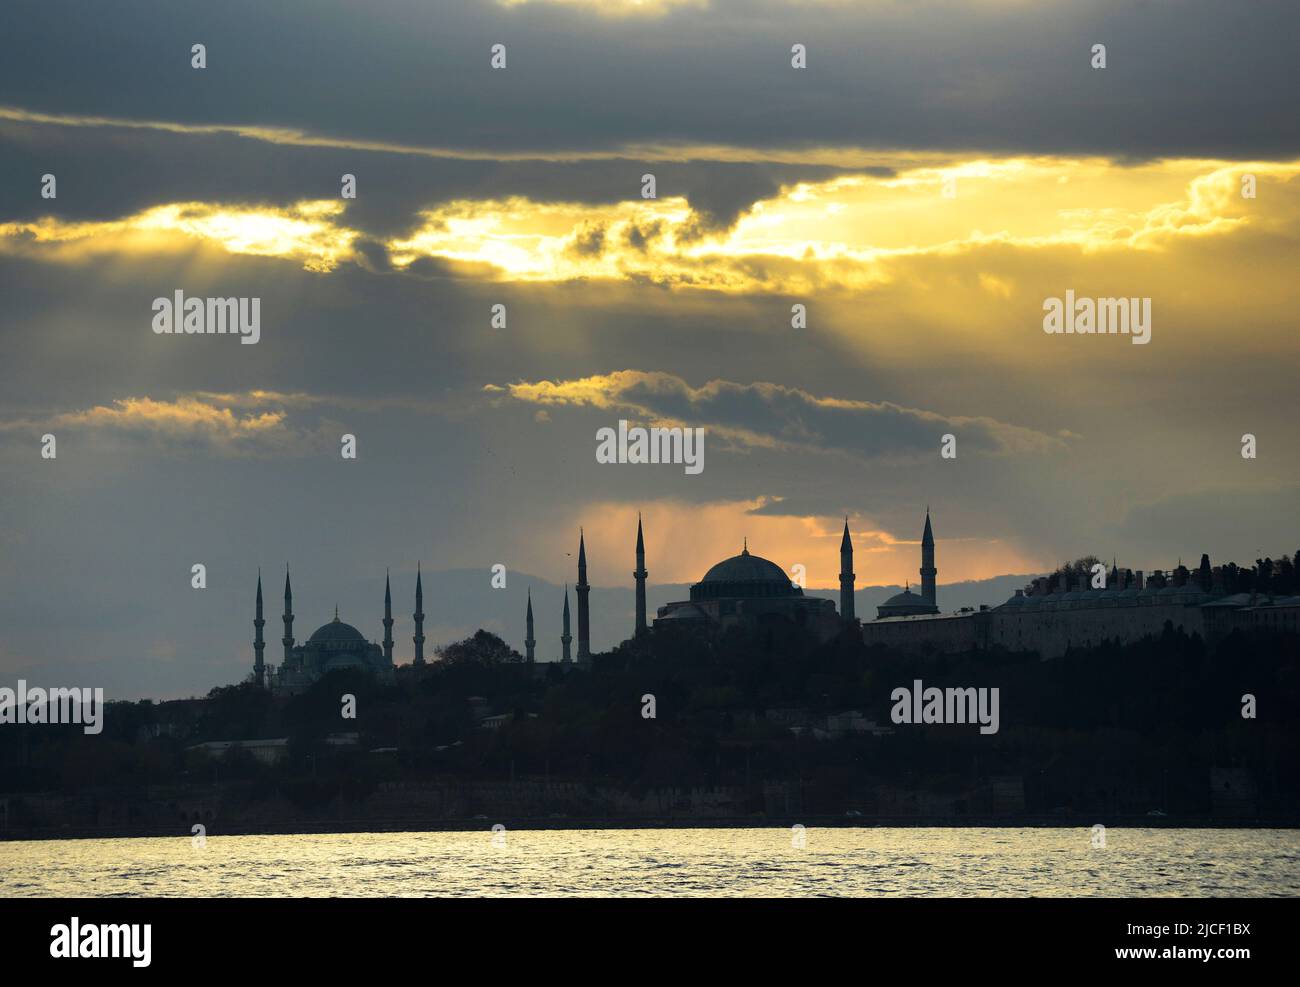 A romantic sunset over the Blue mosque seen from the Asian sidee of Istanbul, Turkey. Stock Photo